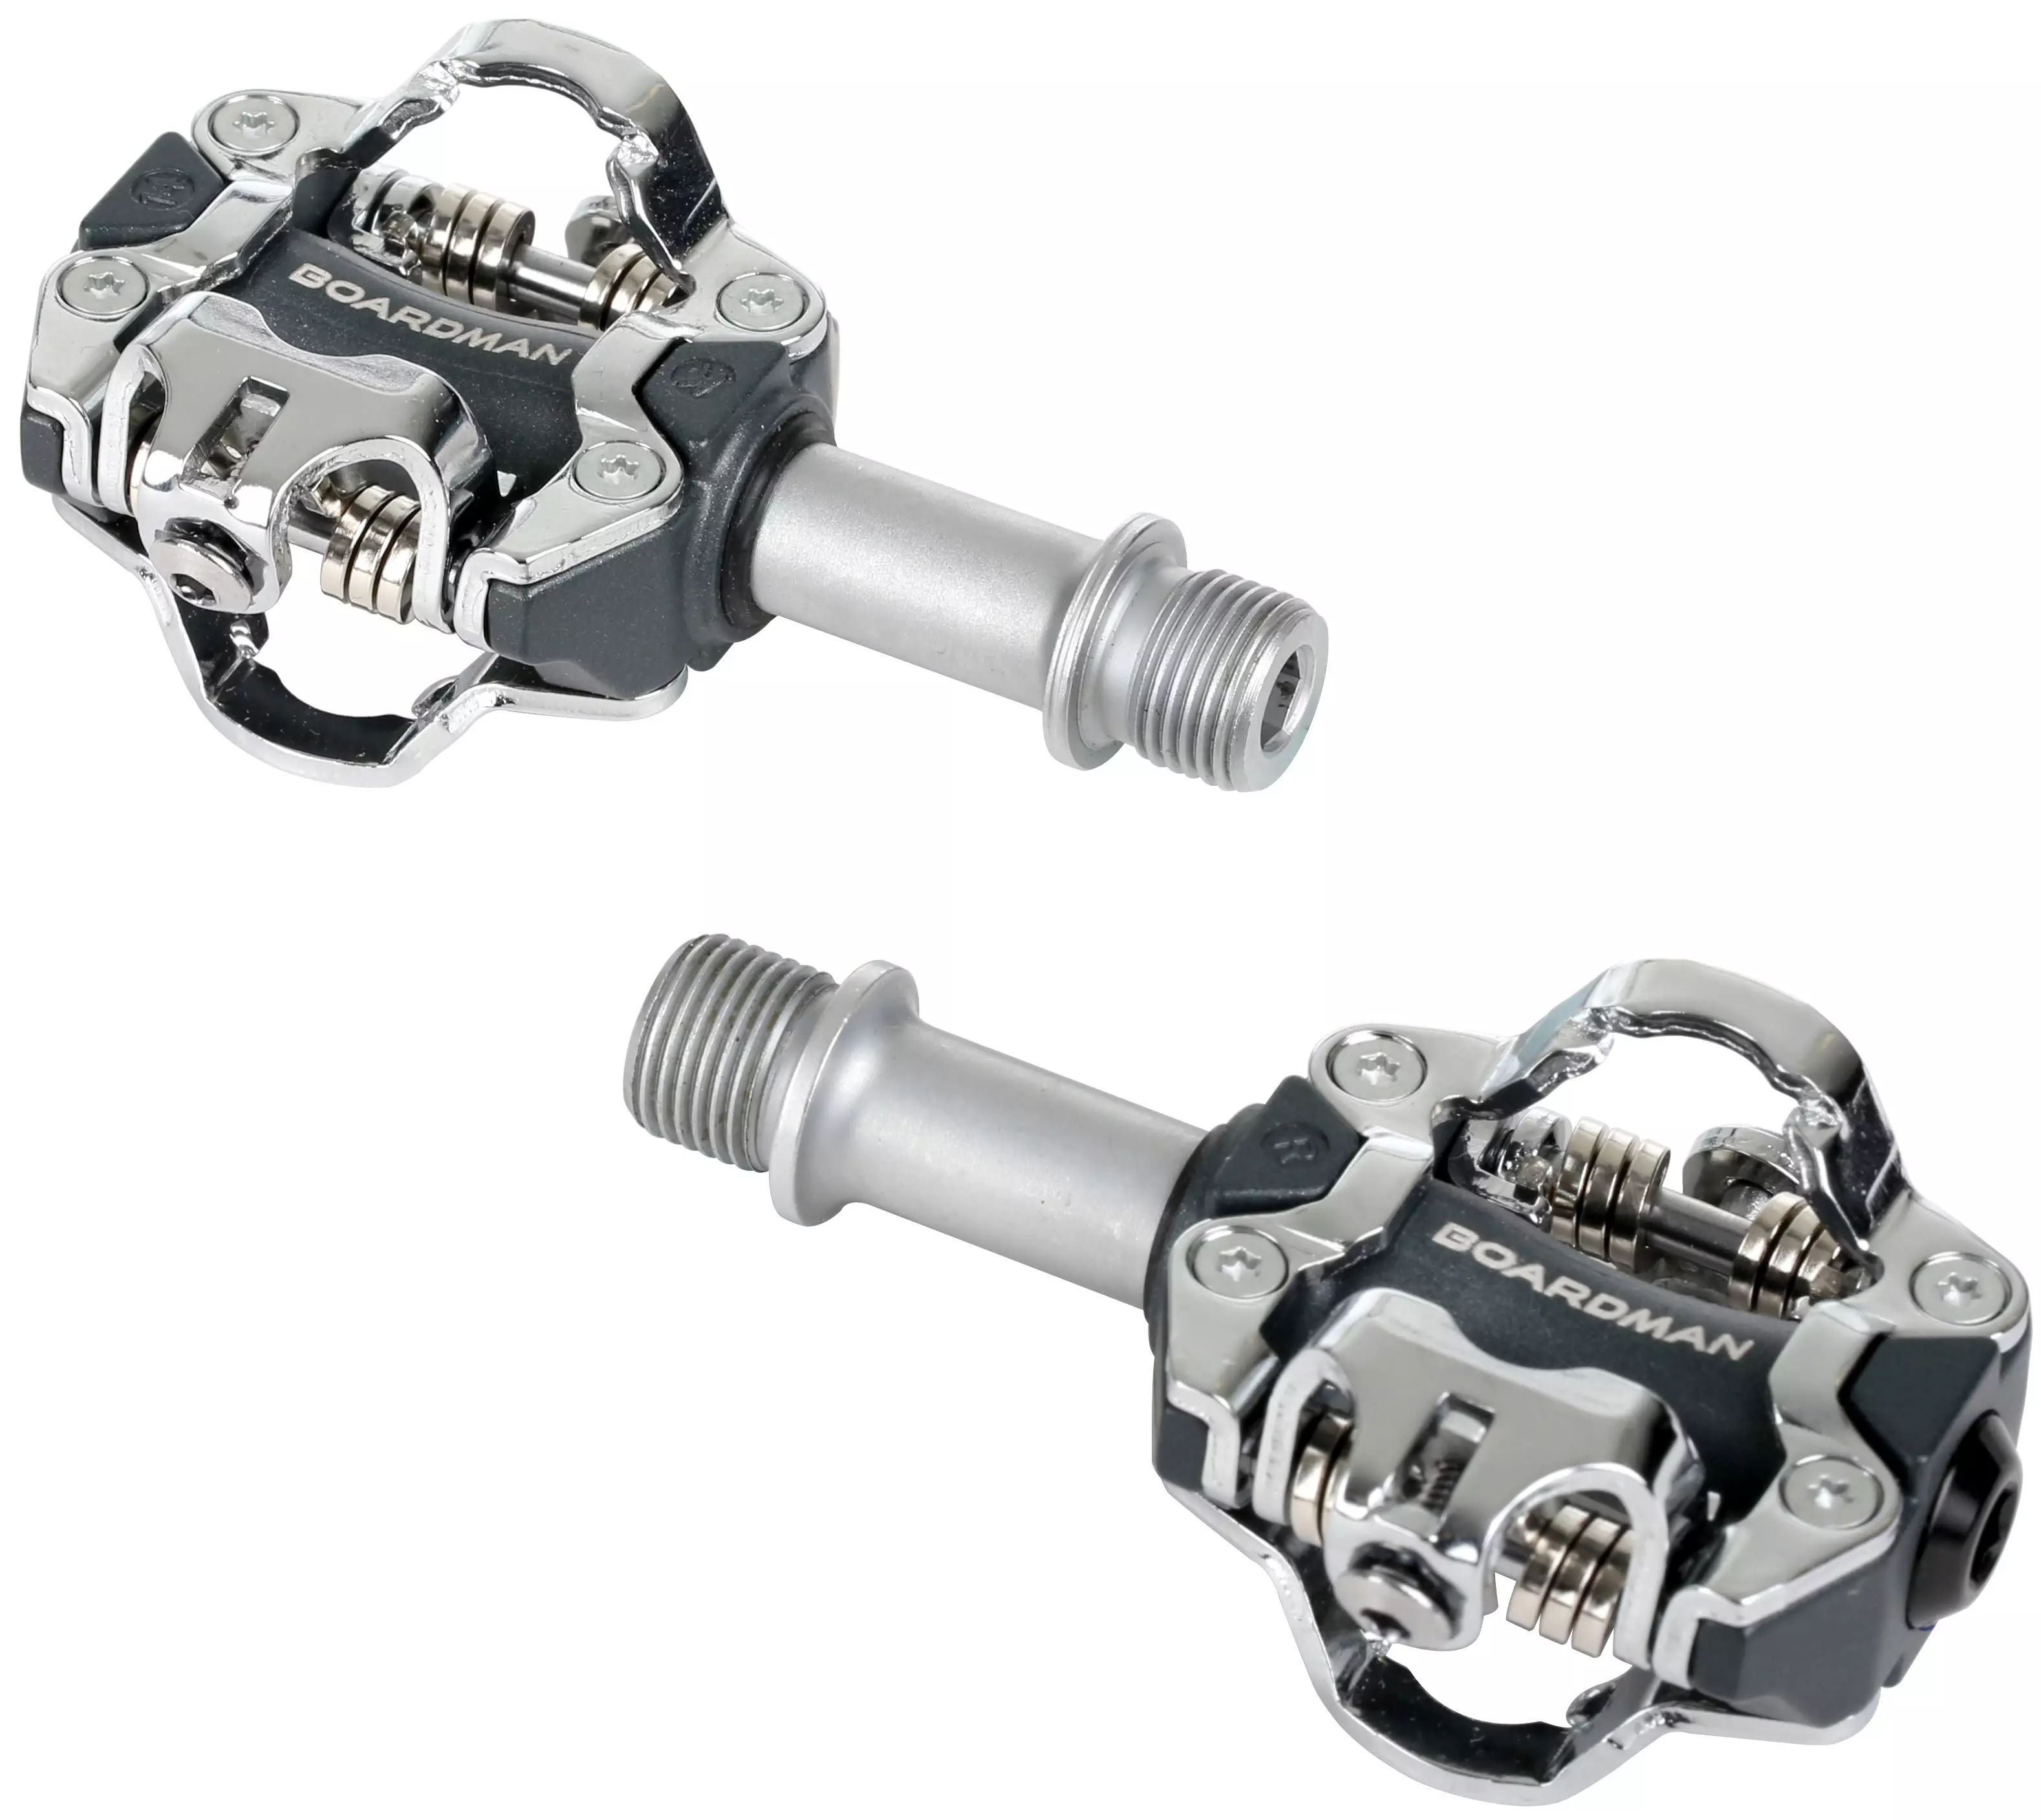 boardman pedals and cleats